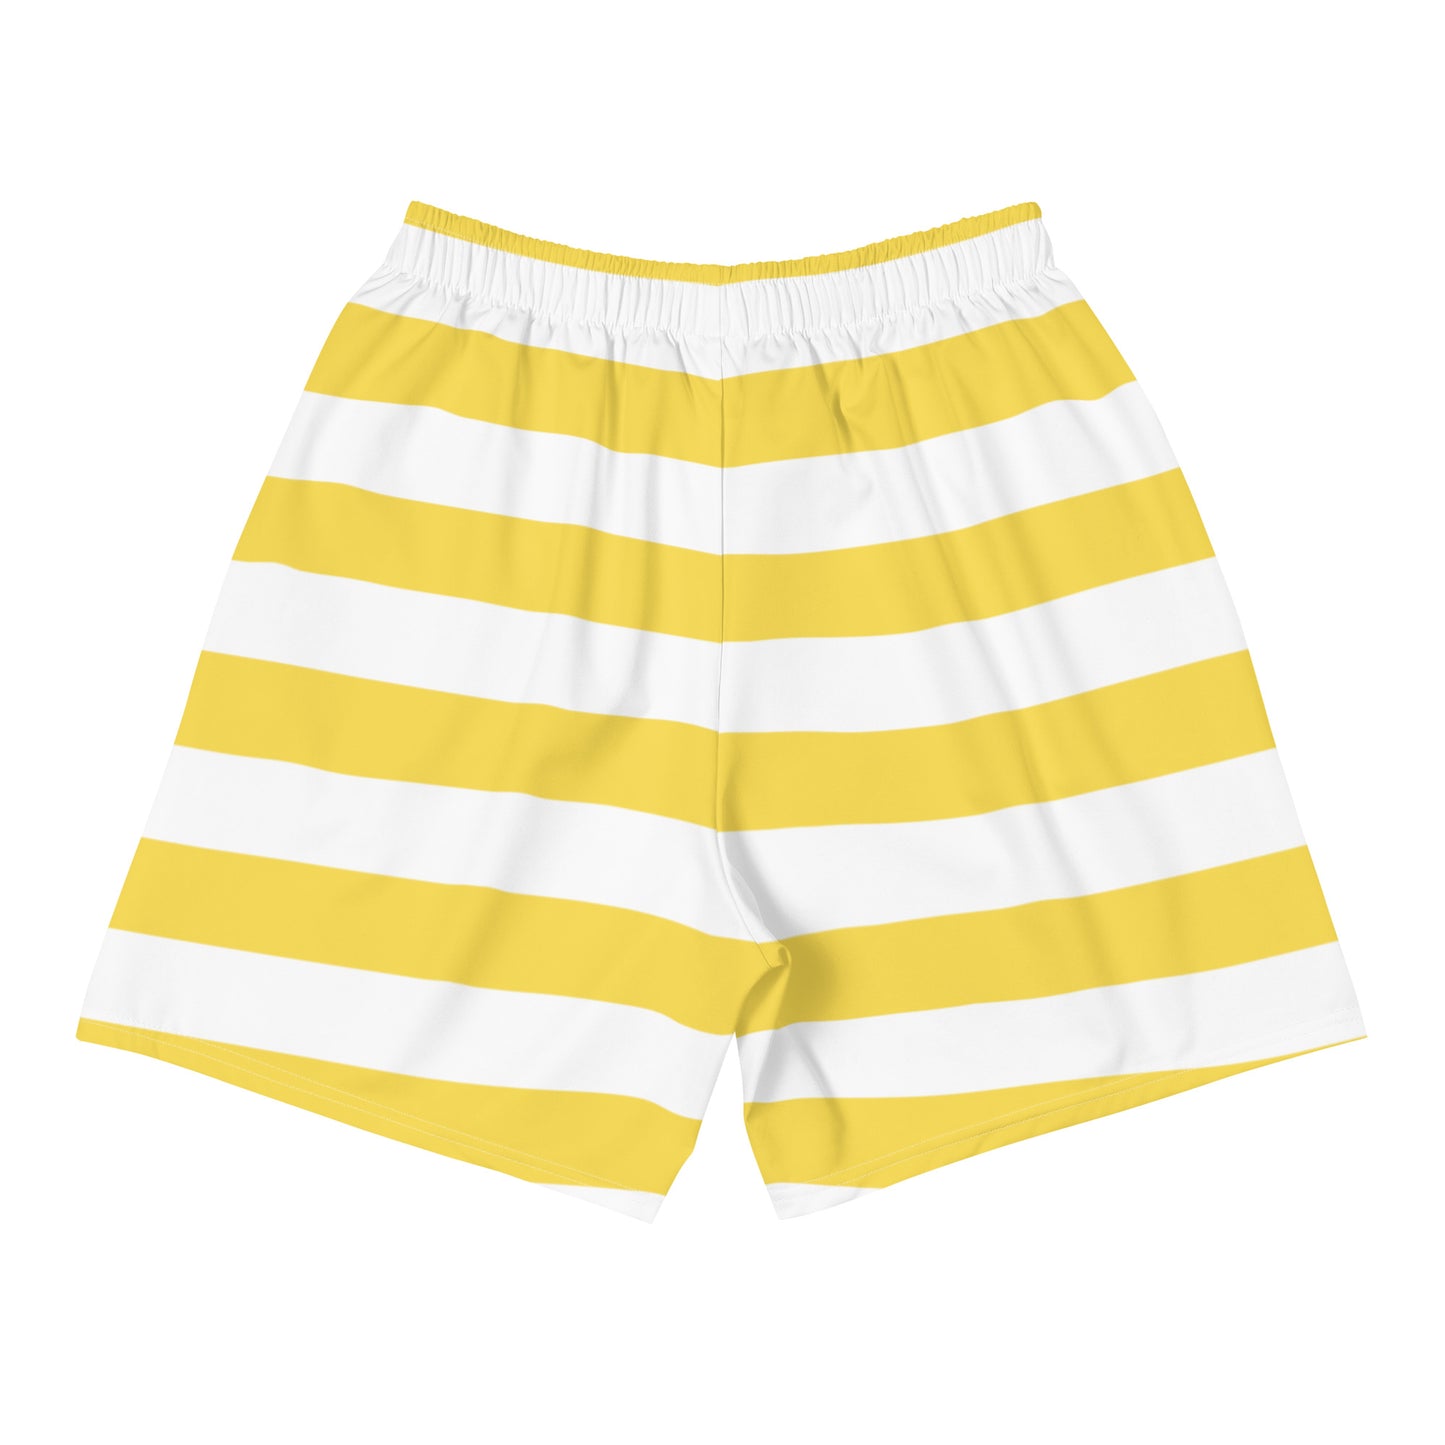 Sailor Yellow - Sustainably Made Men's Short